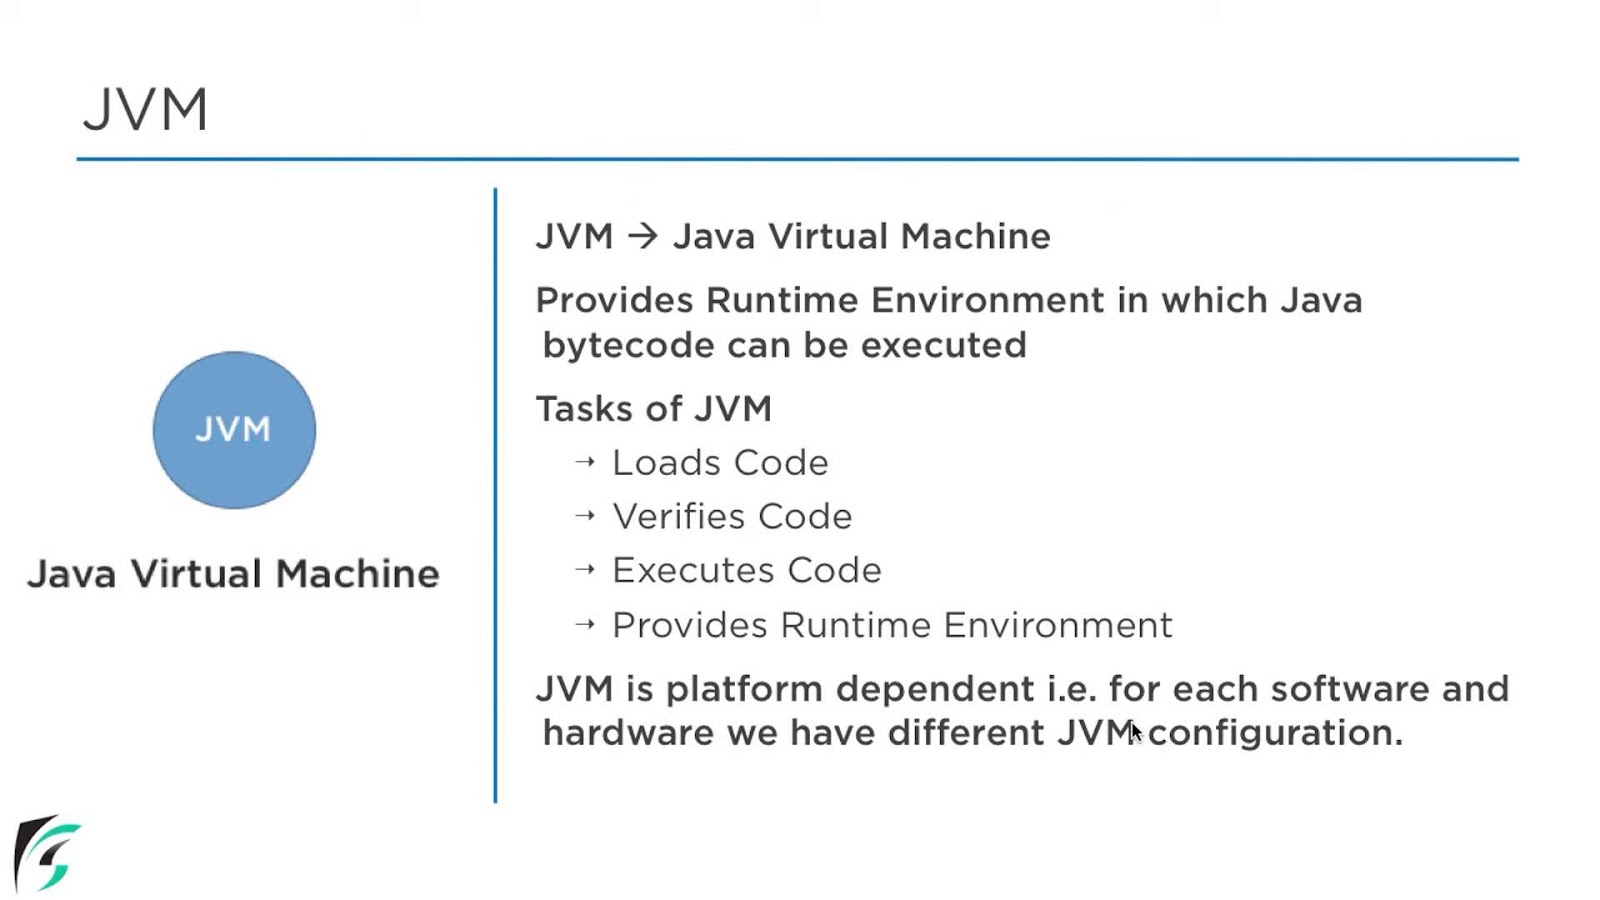 Demystifying Java: A Close Look at JVM, JDK, and JRE